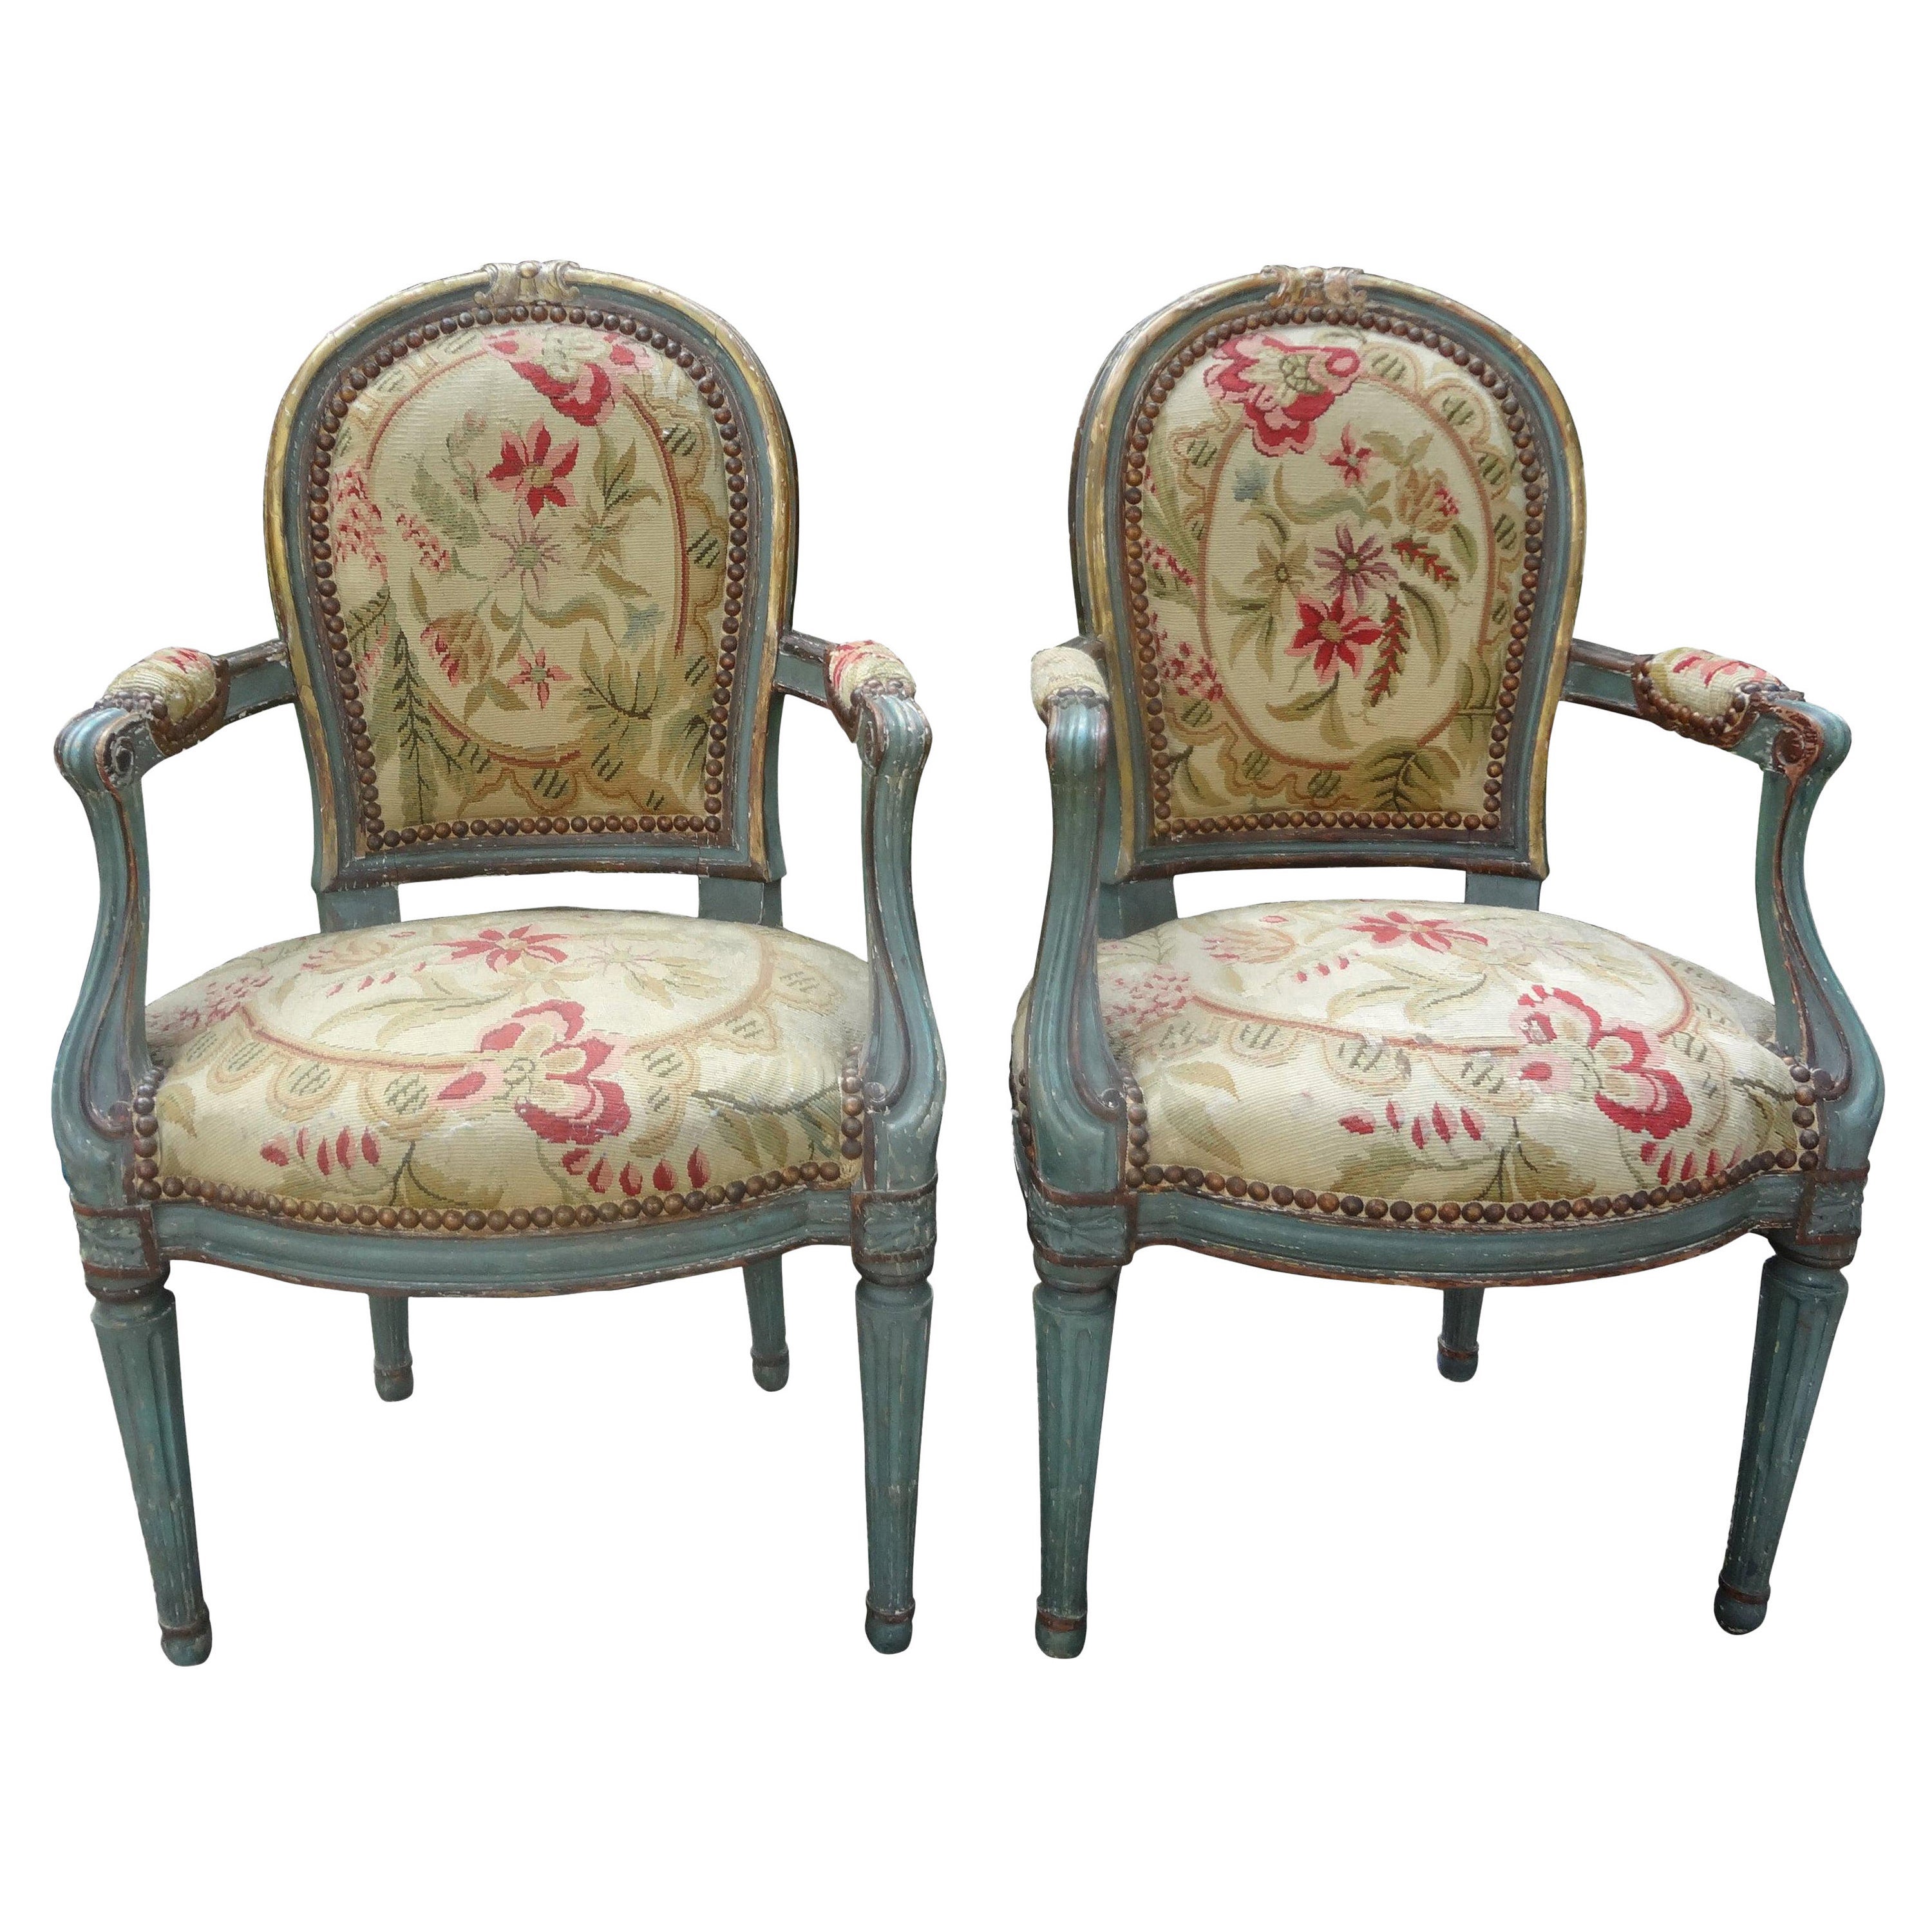 Pair of 19th Century French Régence Style Children's Chairs